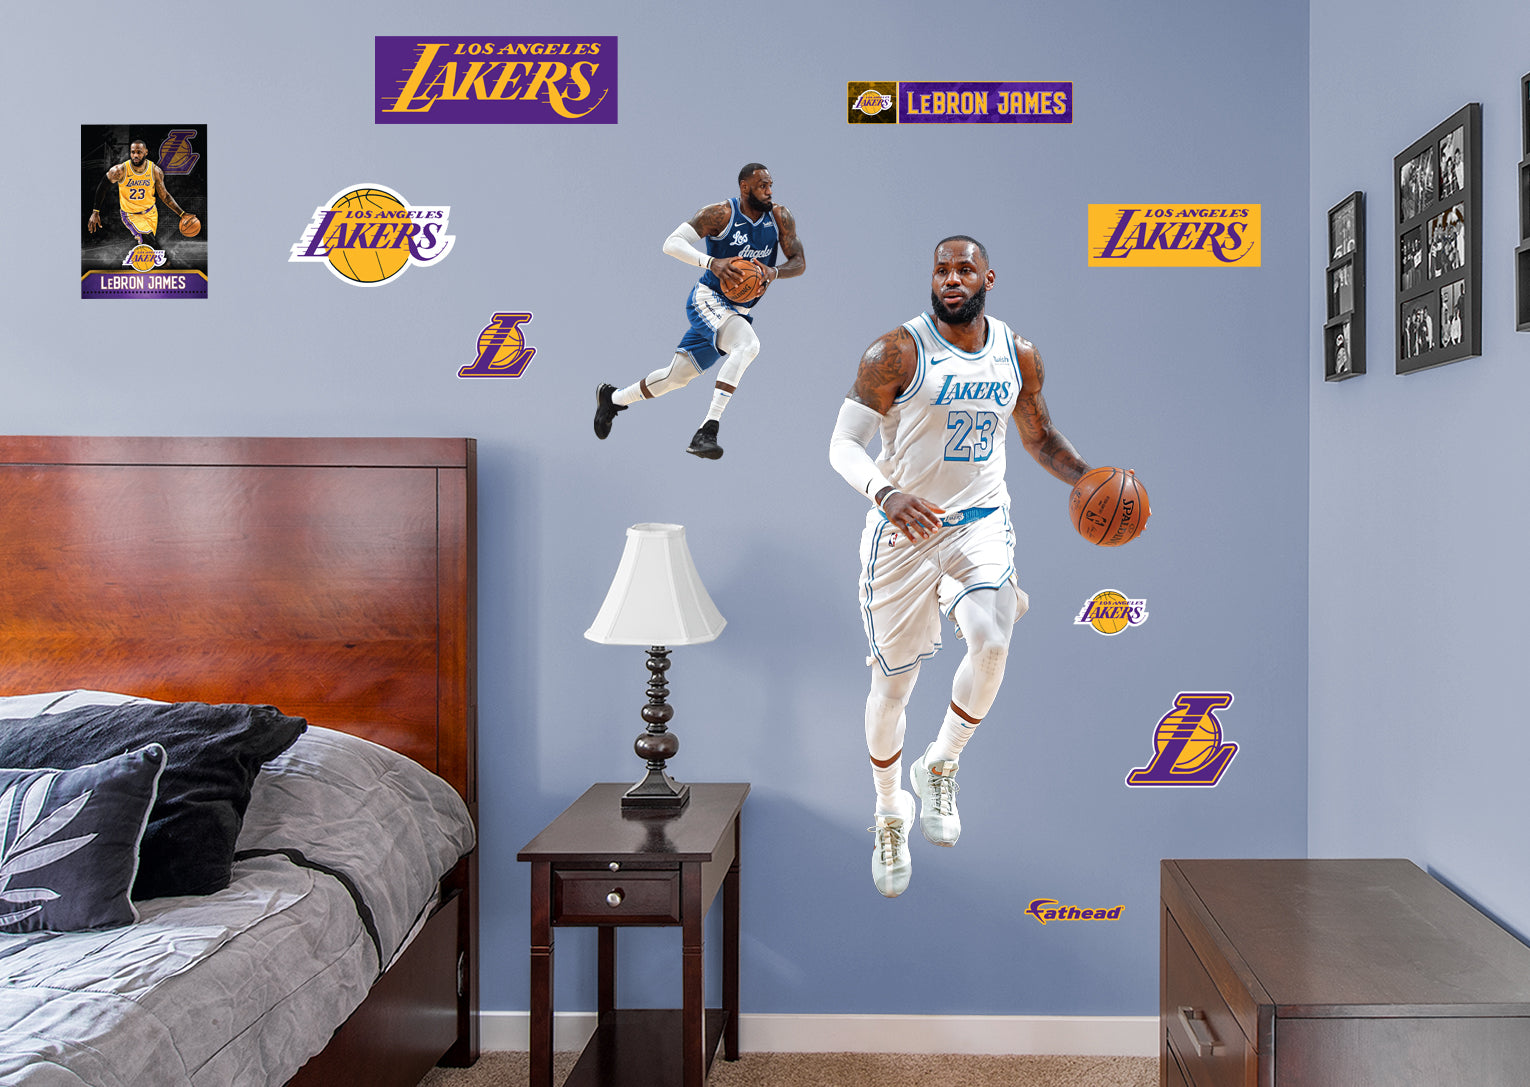 LeBron James 2021 City Jersey for Los Angeles Lakers - NBA Removable Wall Decal Giant Athlete + 2 Wall Decals 25W x51H